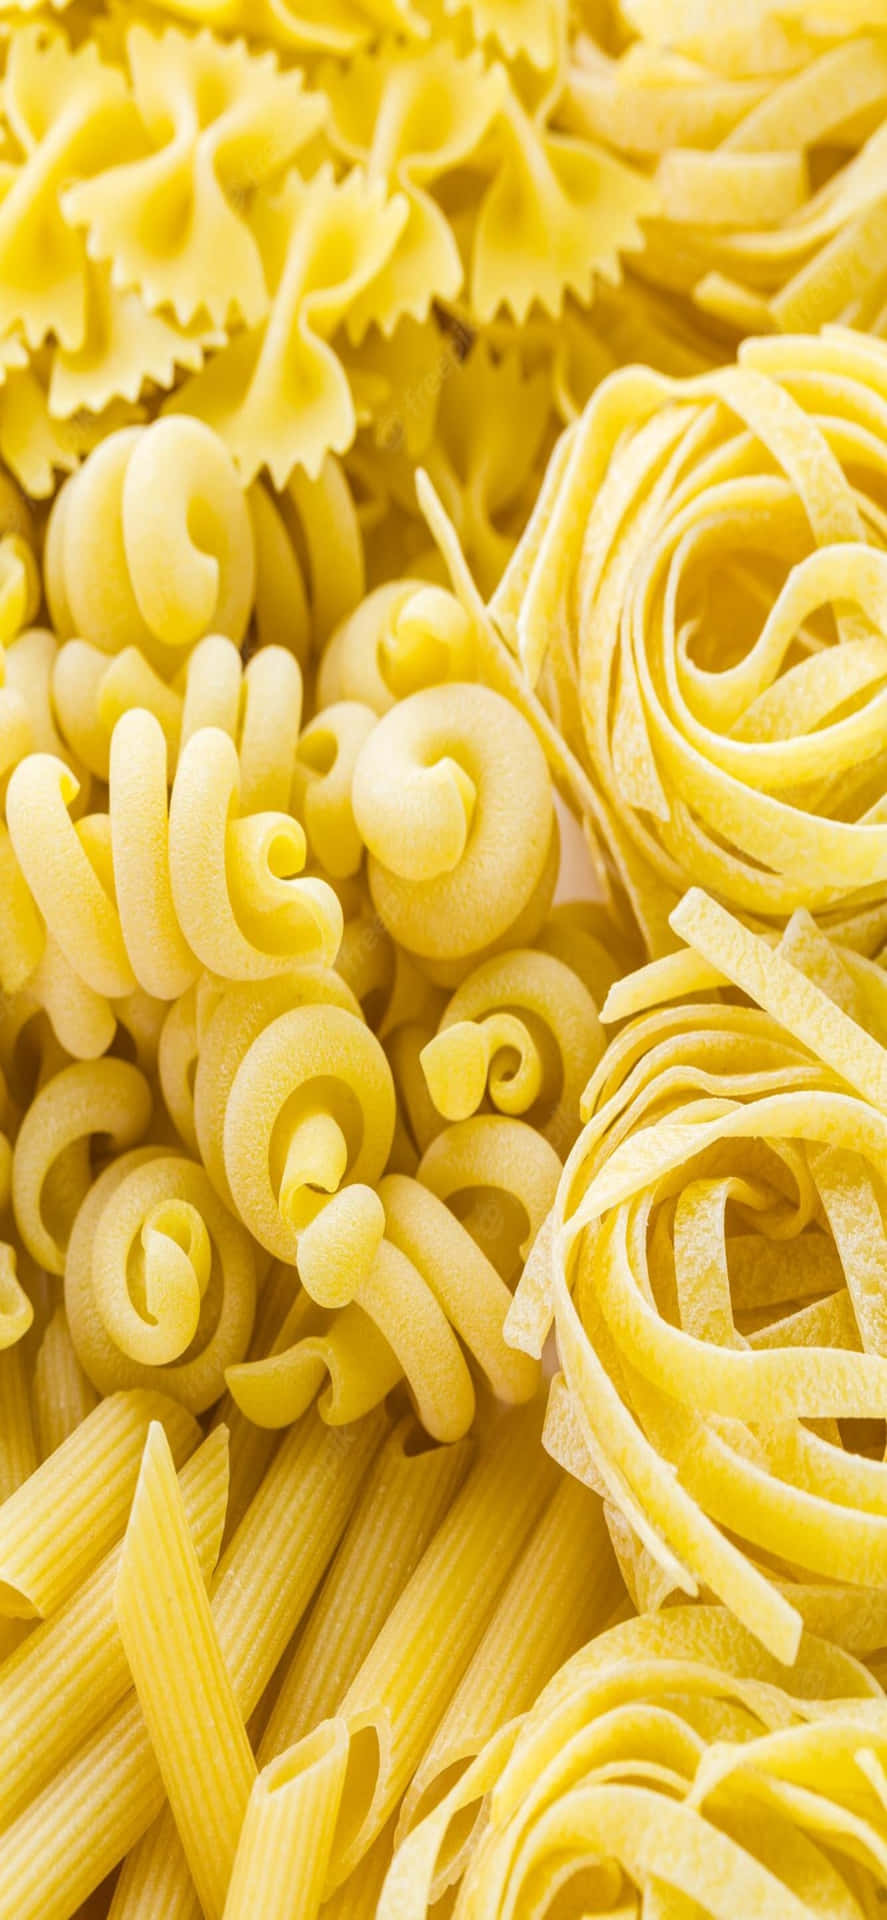 Four Kinds Of Pasta iPhone X Pasta Background